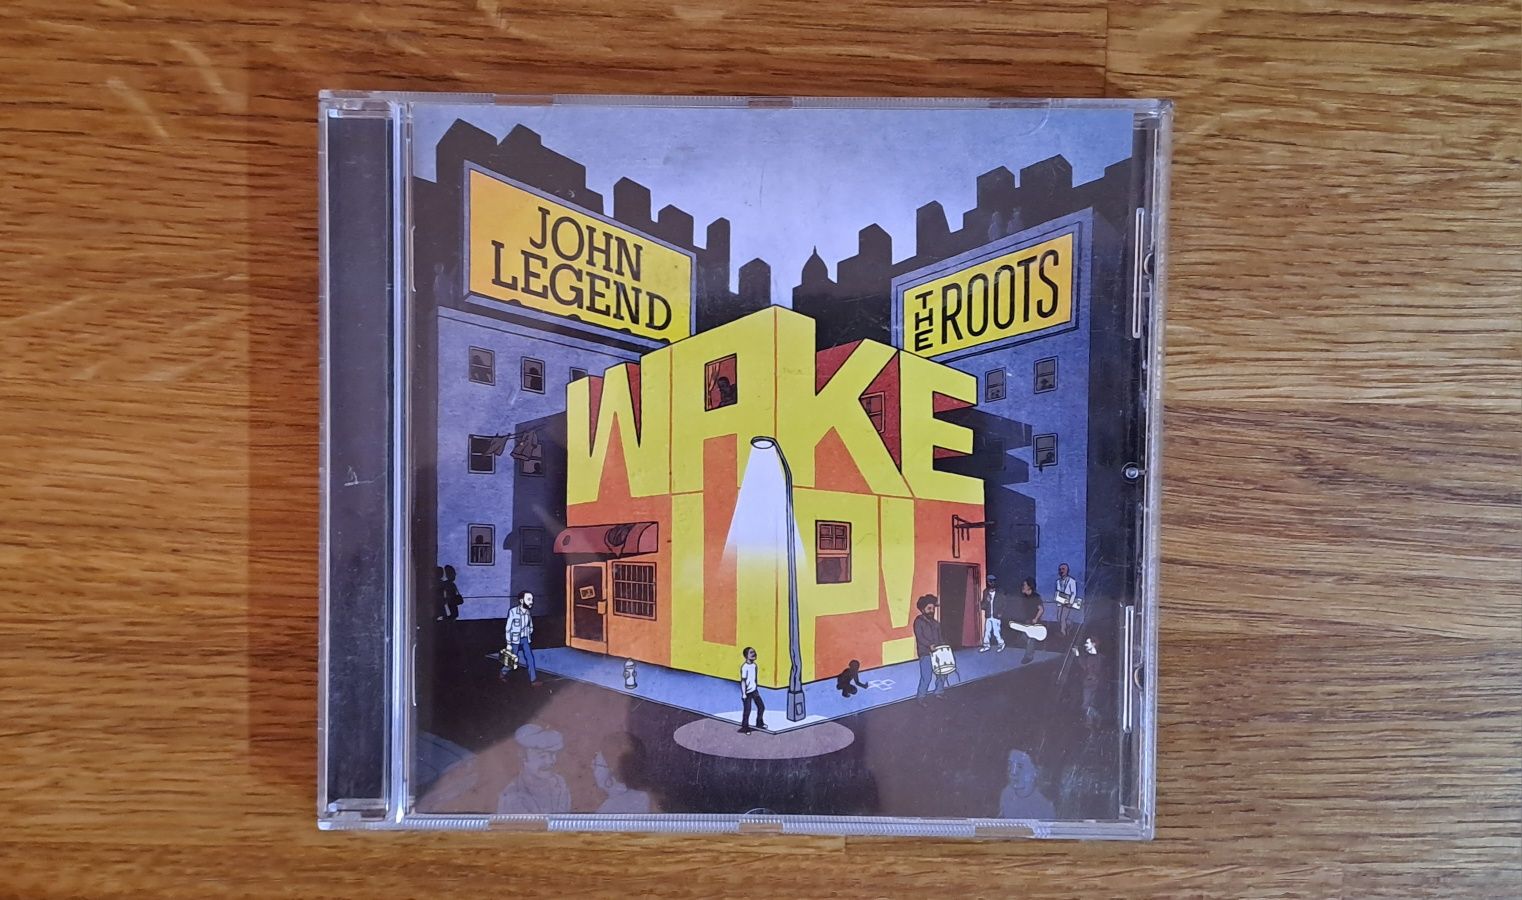 John Legend & The Roots Wake Up